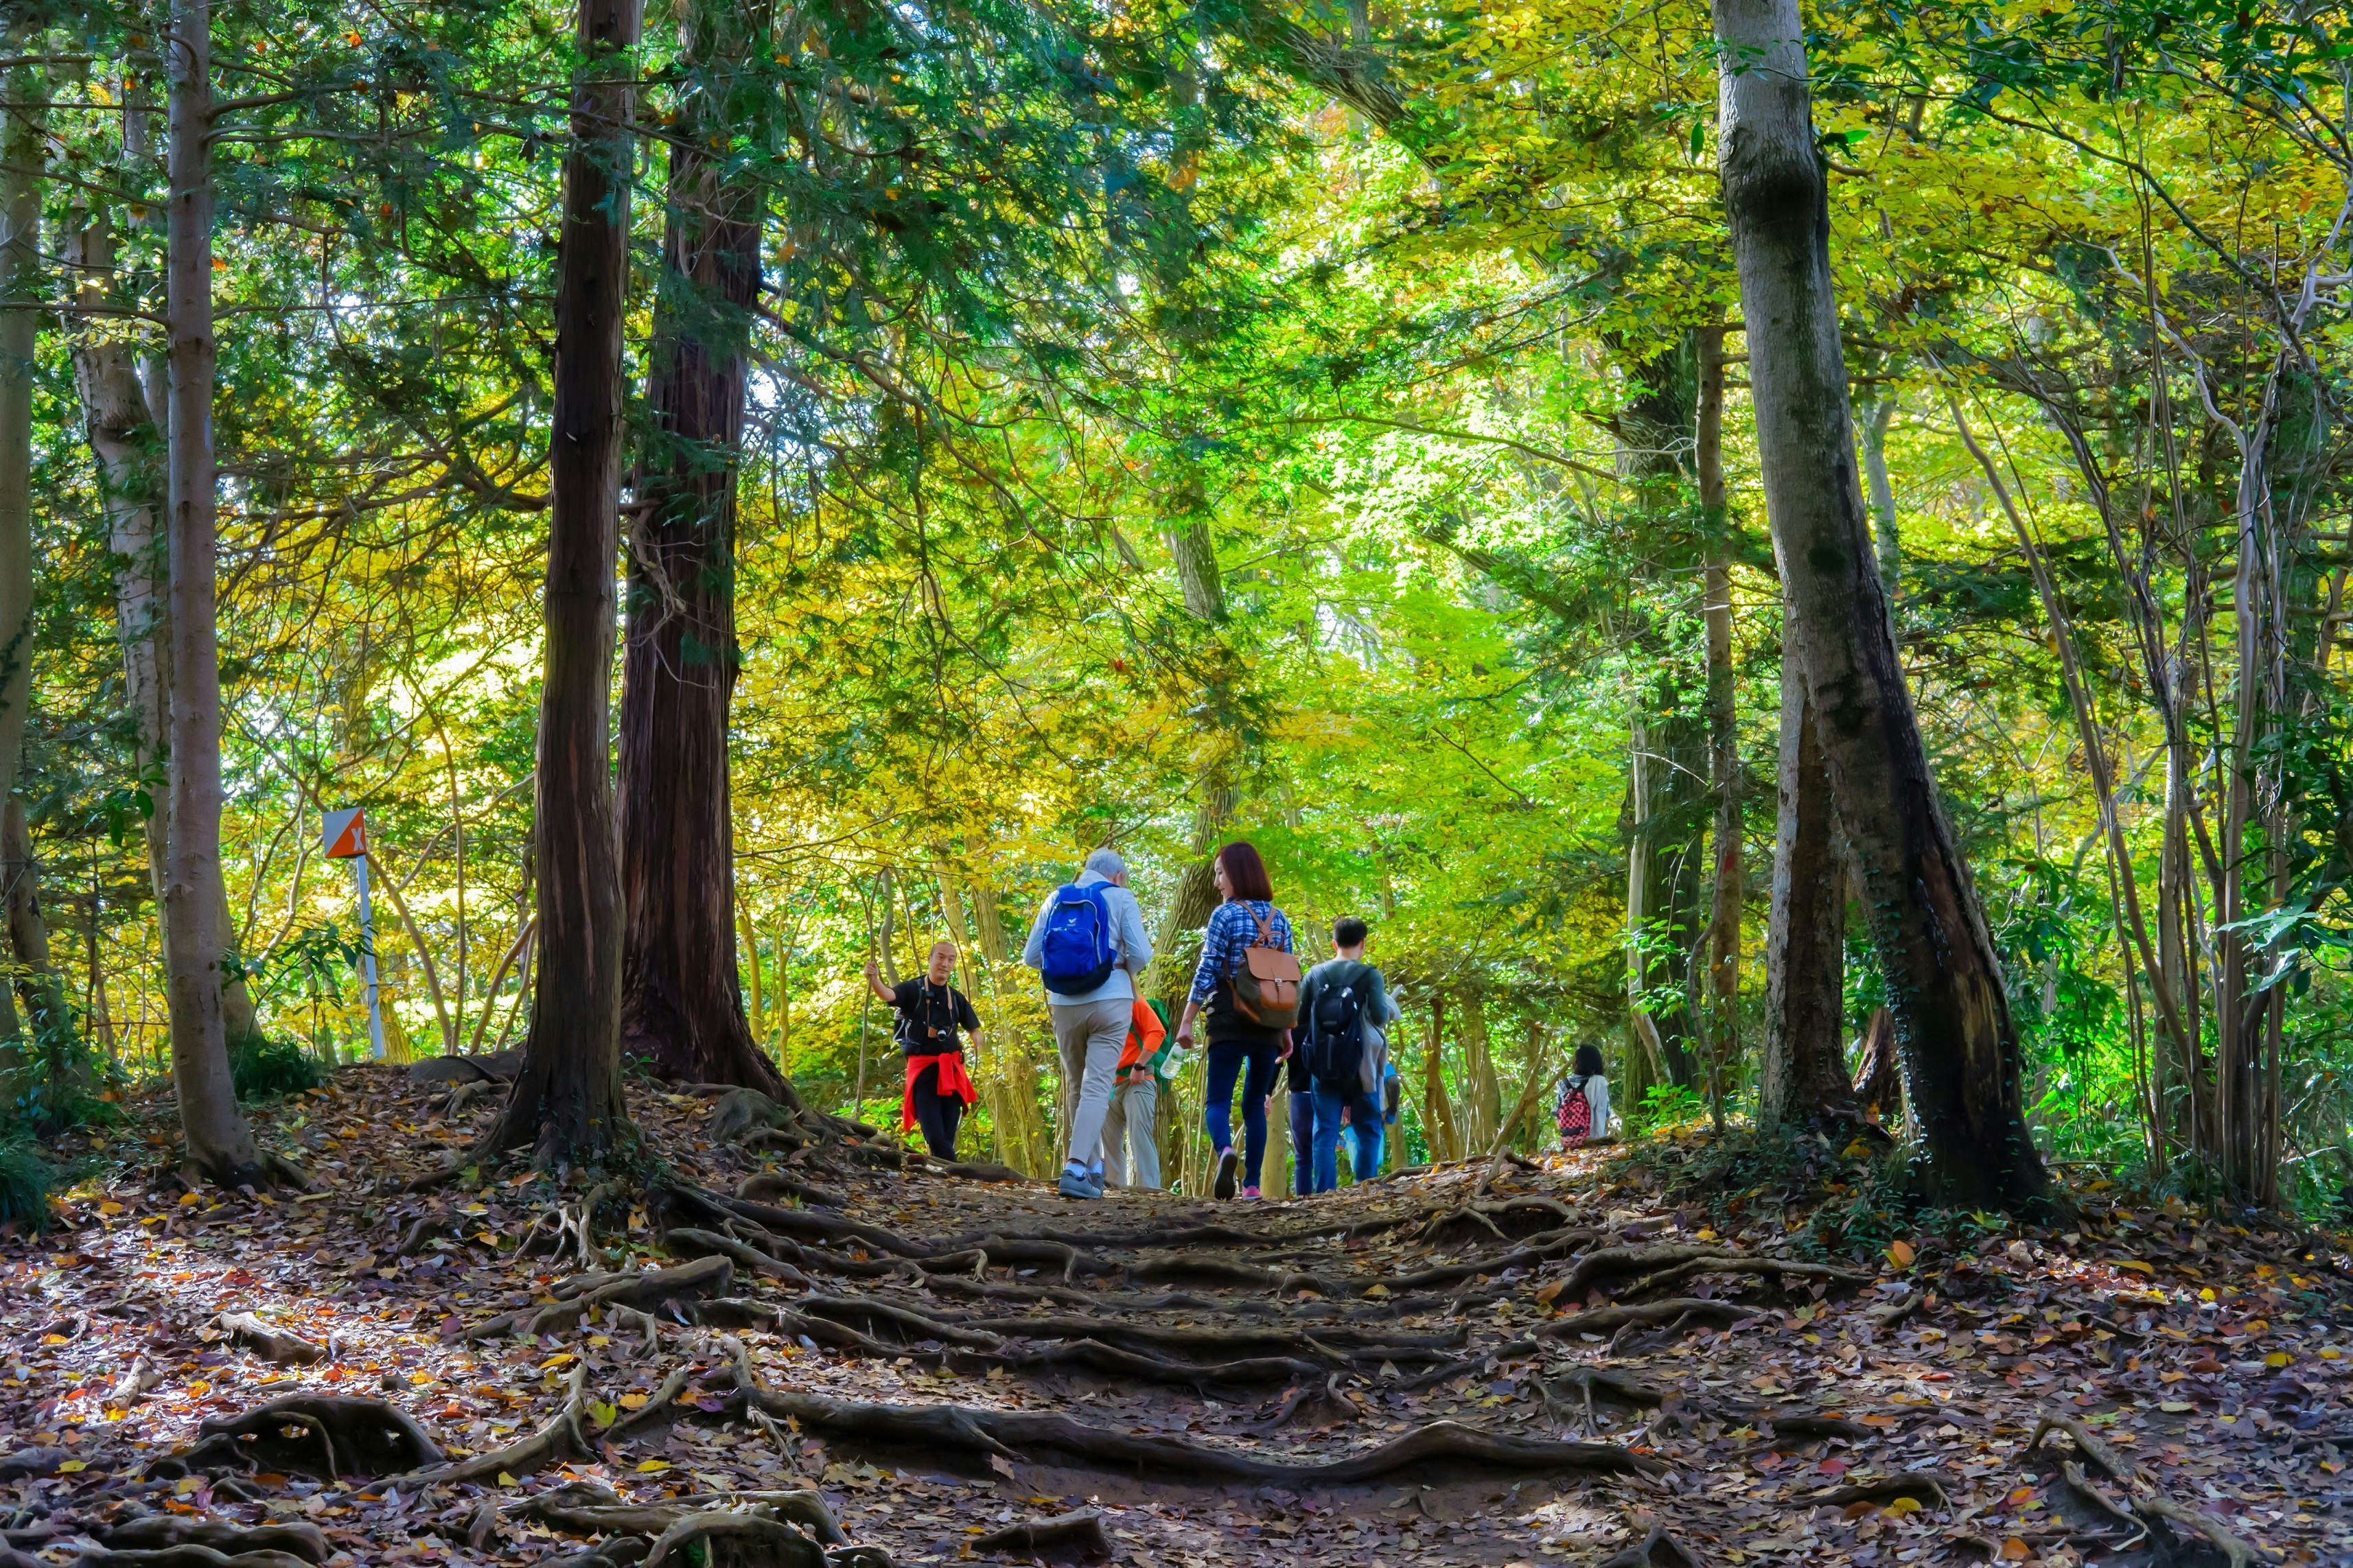 Half a dozen hikers walk along a forested trail to the summit of Mount Takao in Tokyo. The hikers wear backpacks and one uses a long stick to assist with walking.